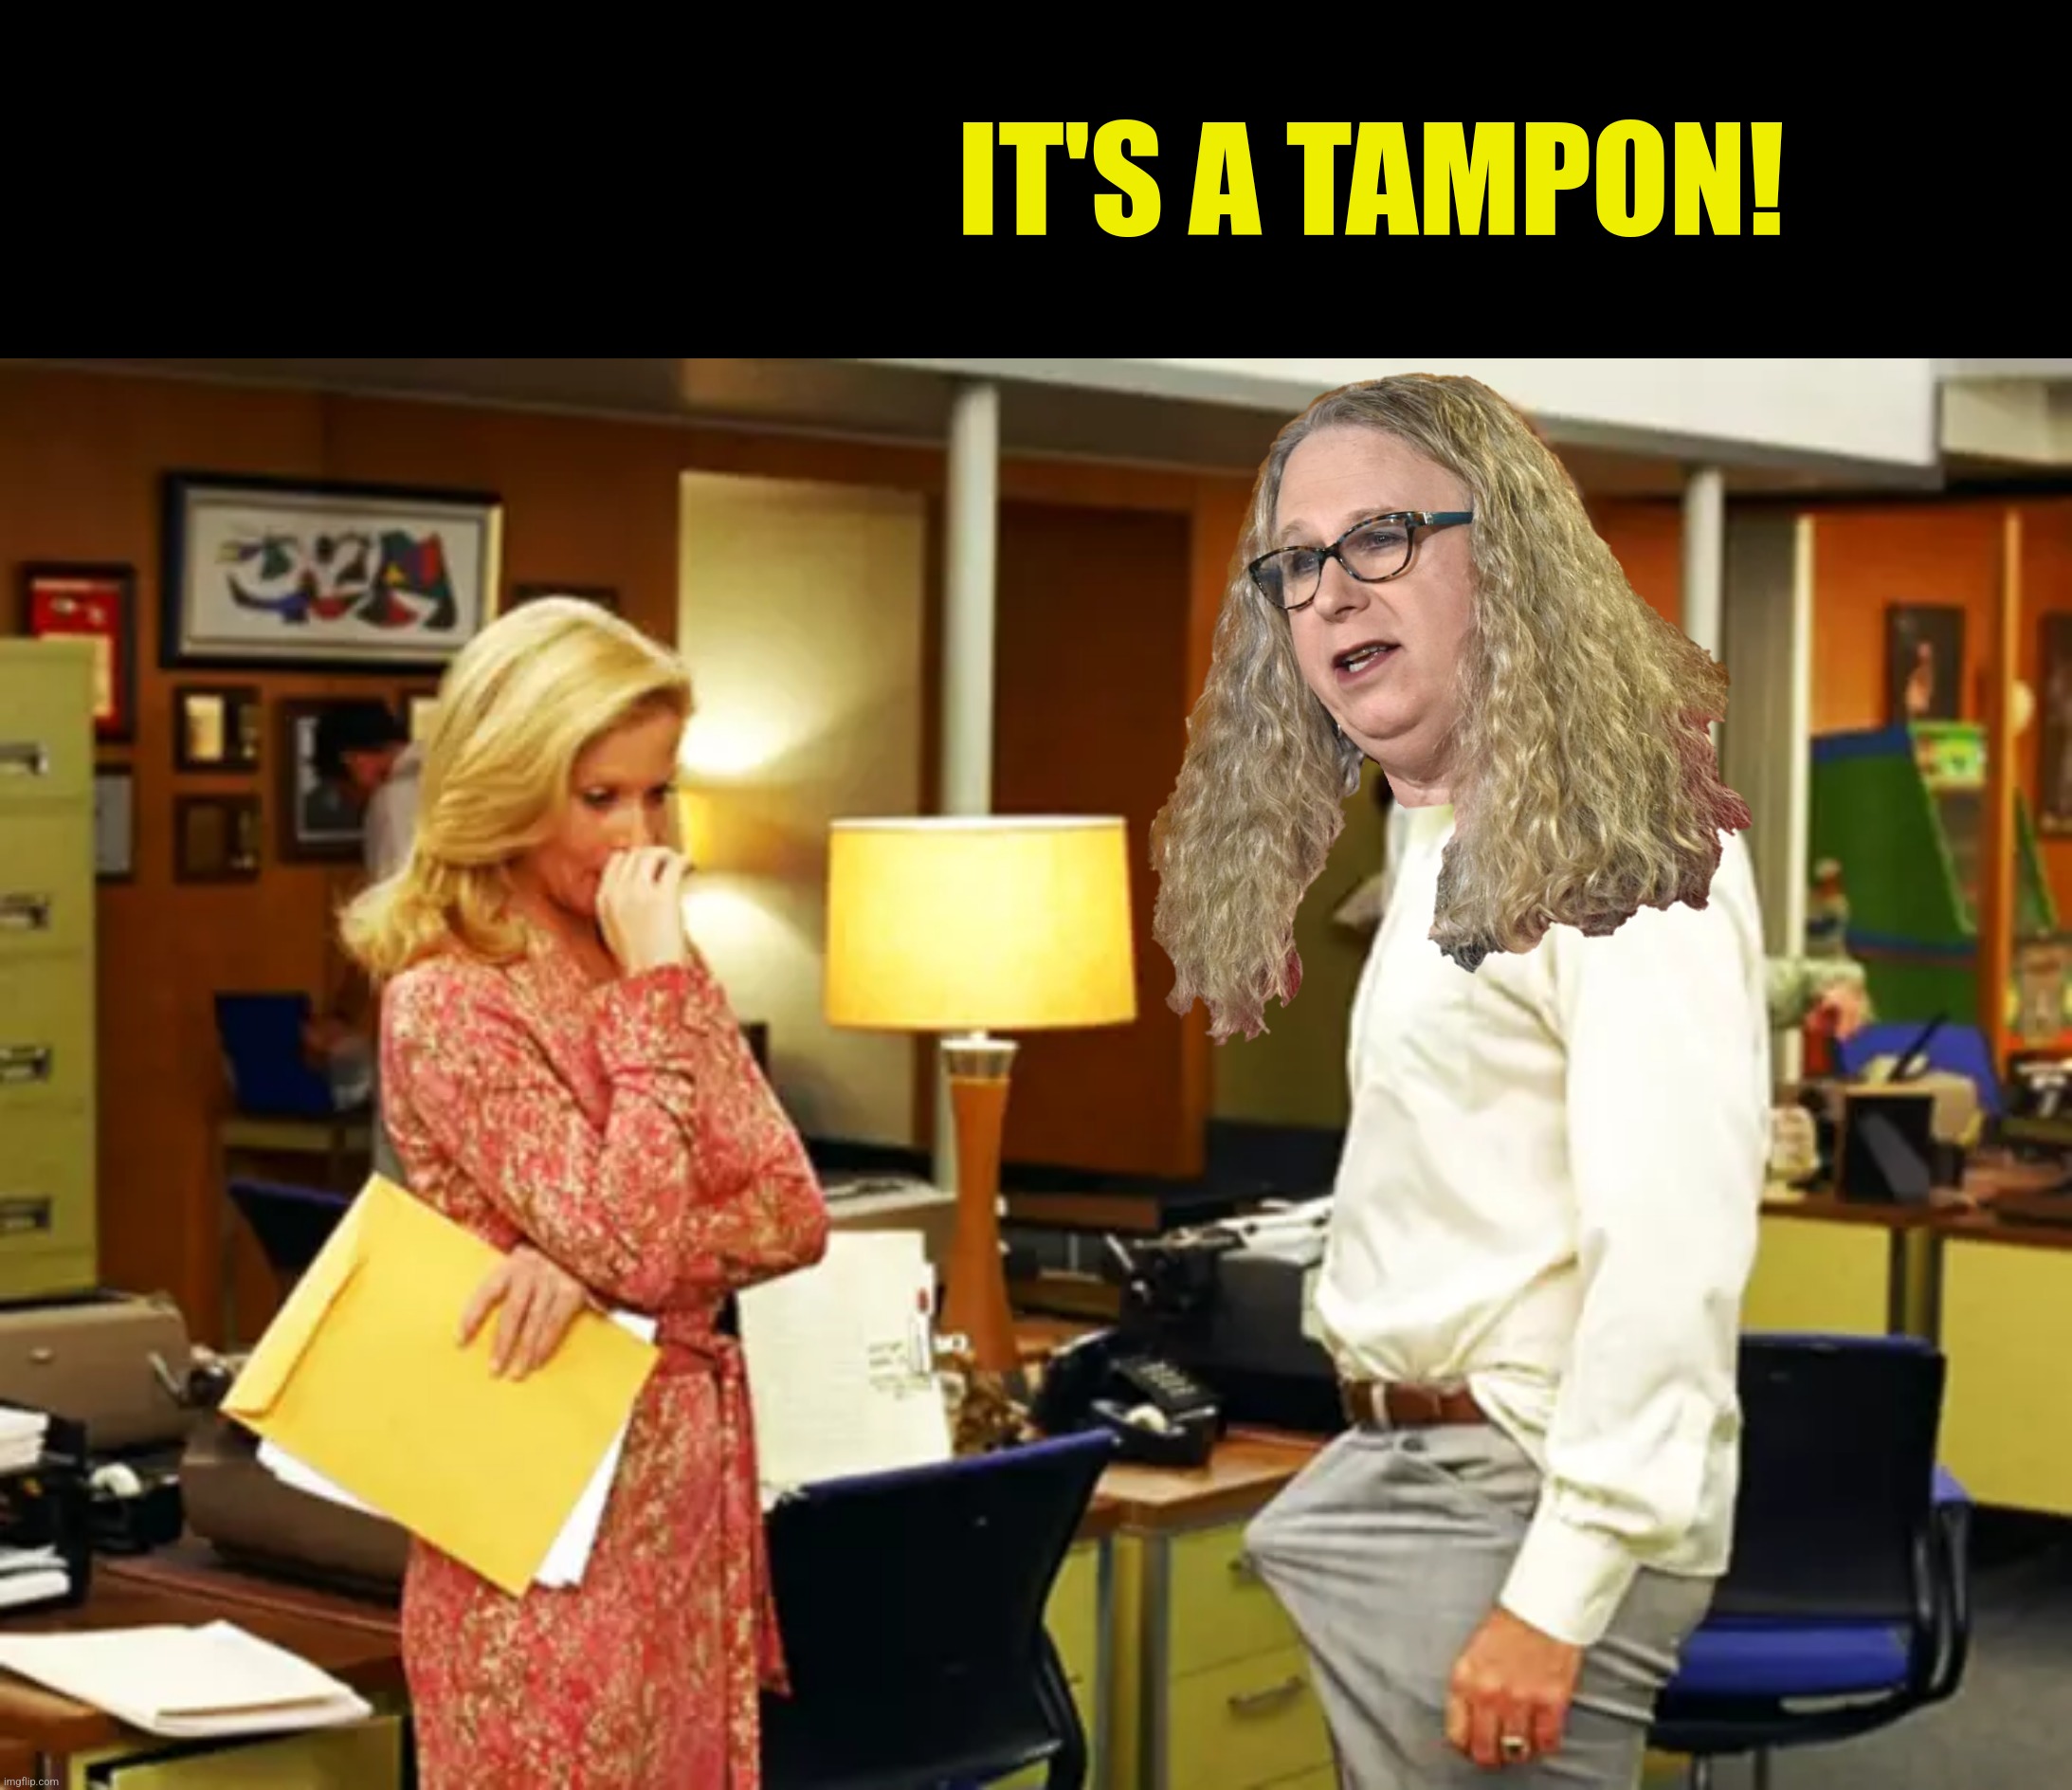 IT'S A TAMPON! | made w/ Imgflip meme maker